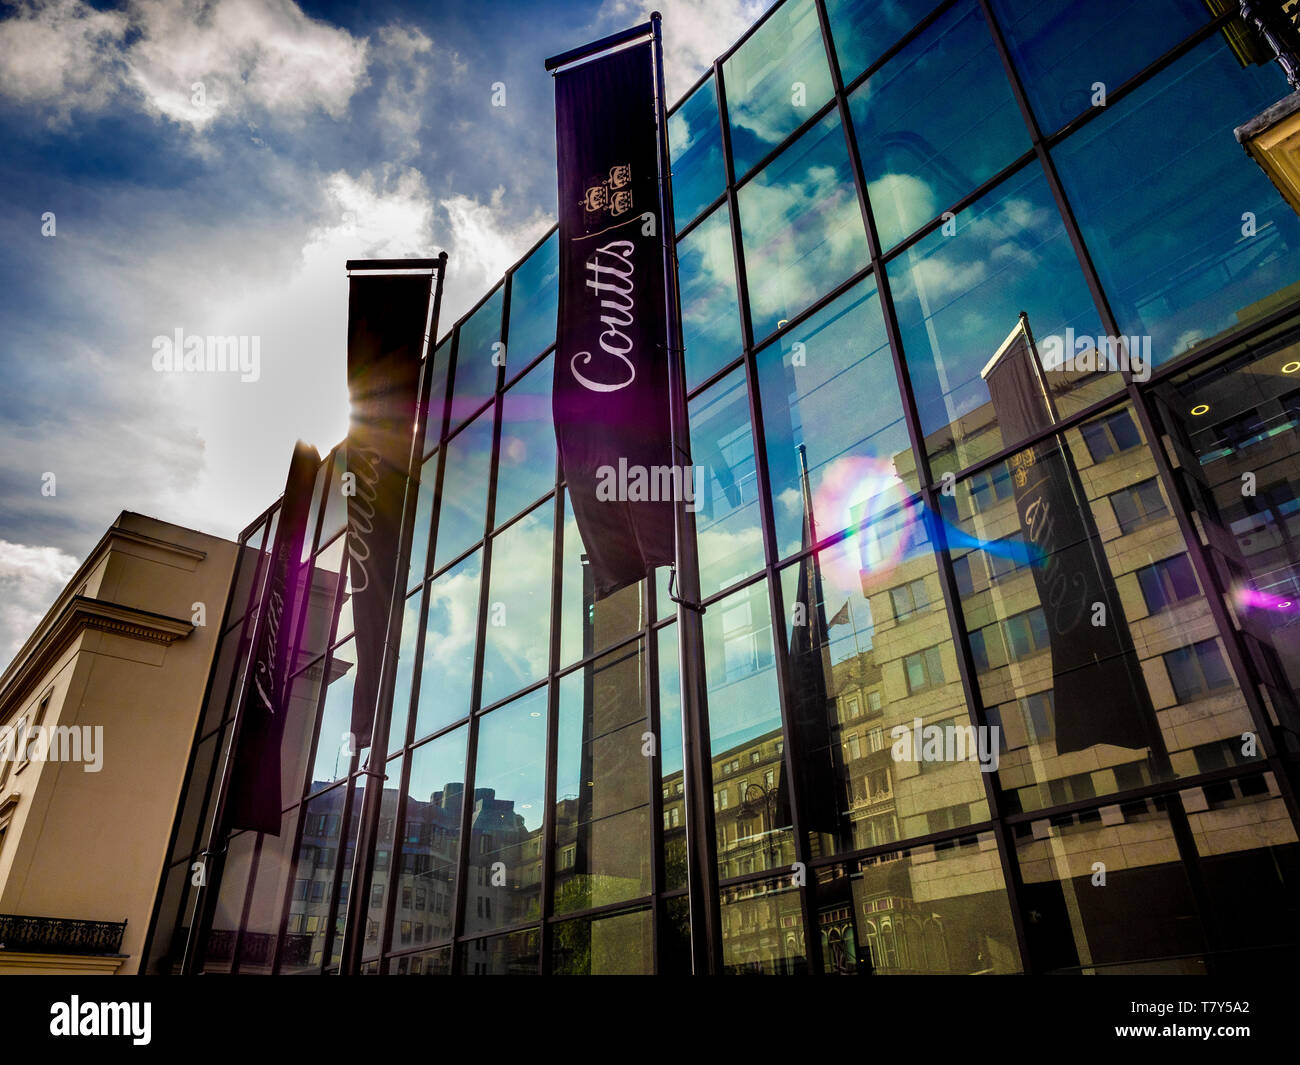 Coutts Bank building, Strand, Charing Cross, Londres, Reino Unido. Foto de stock